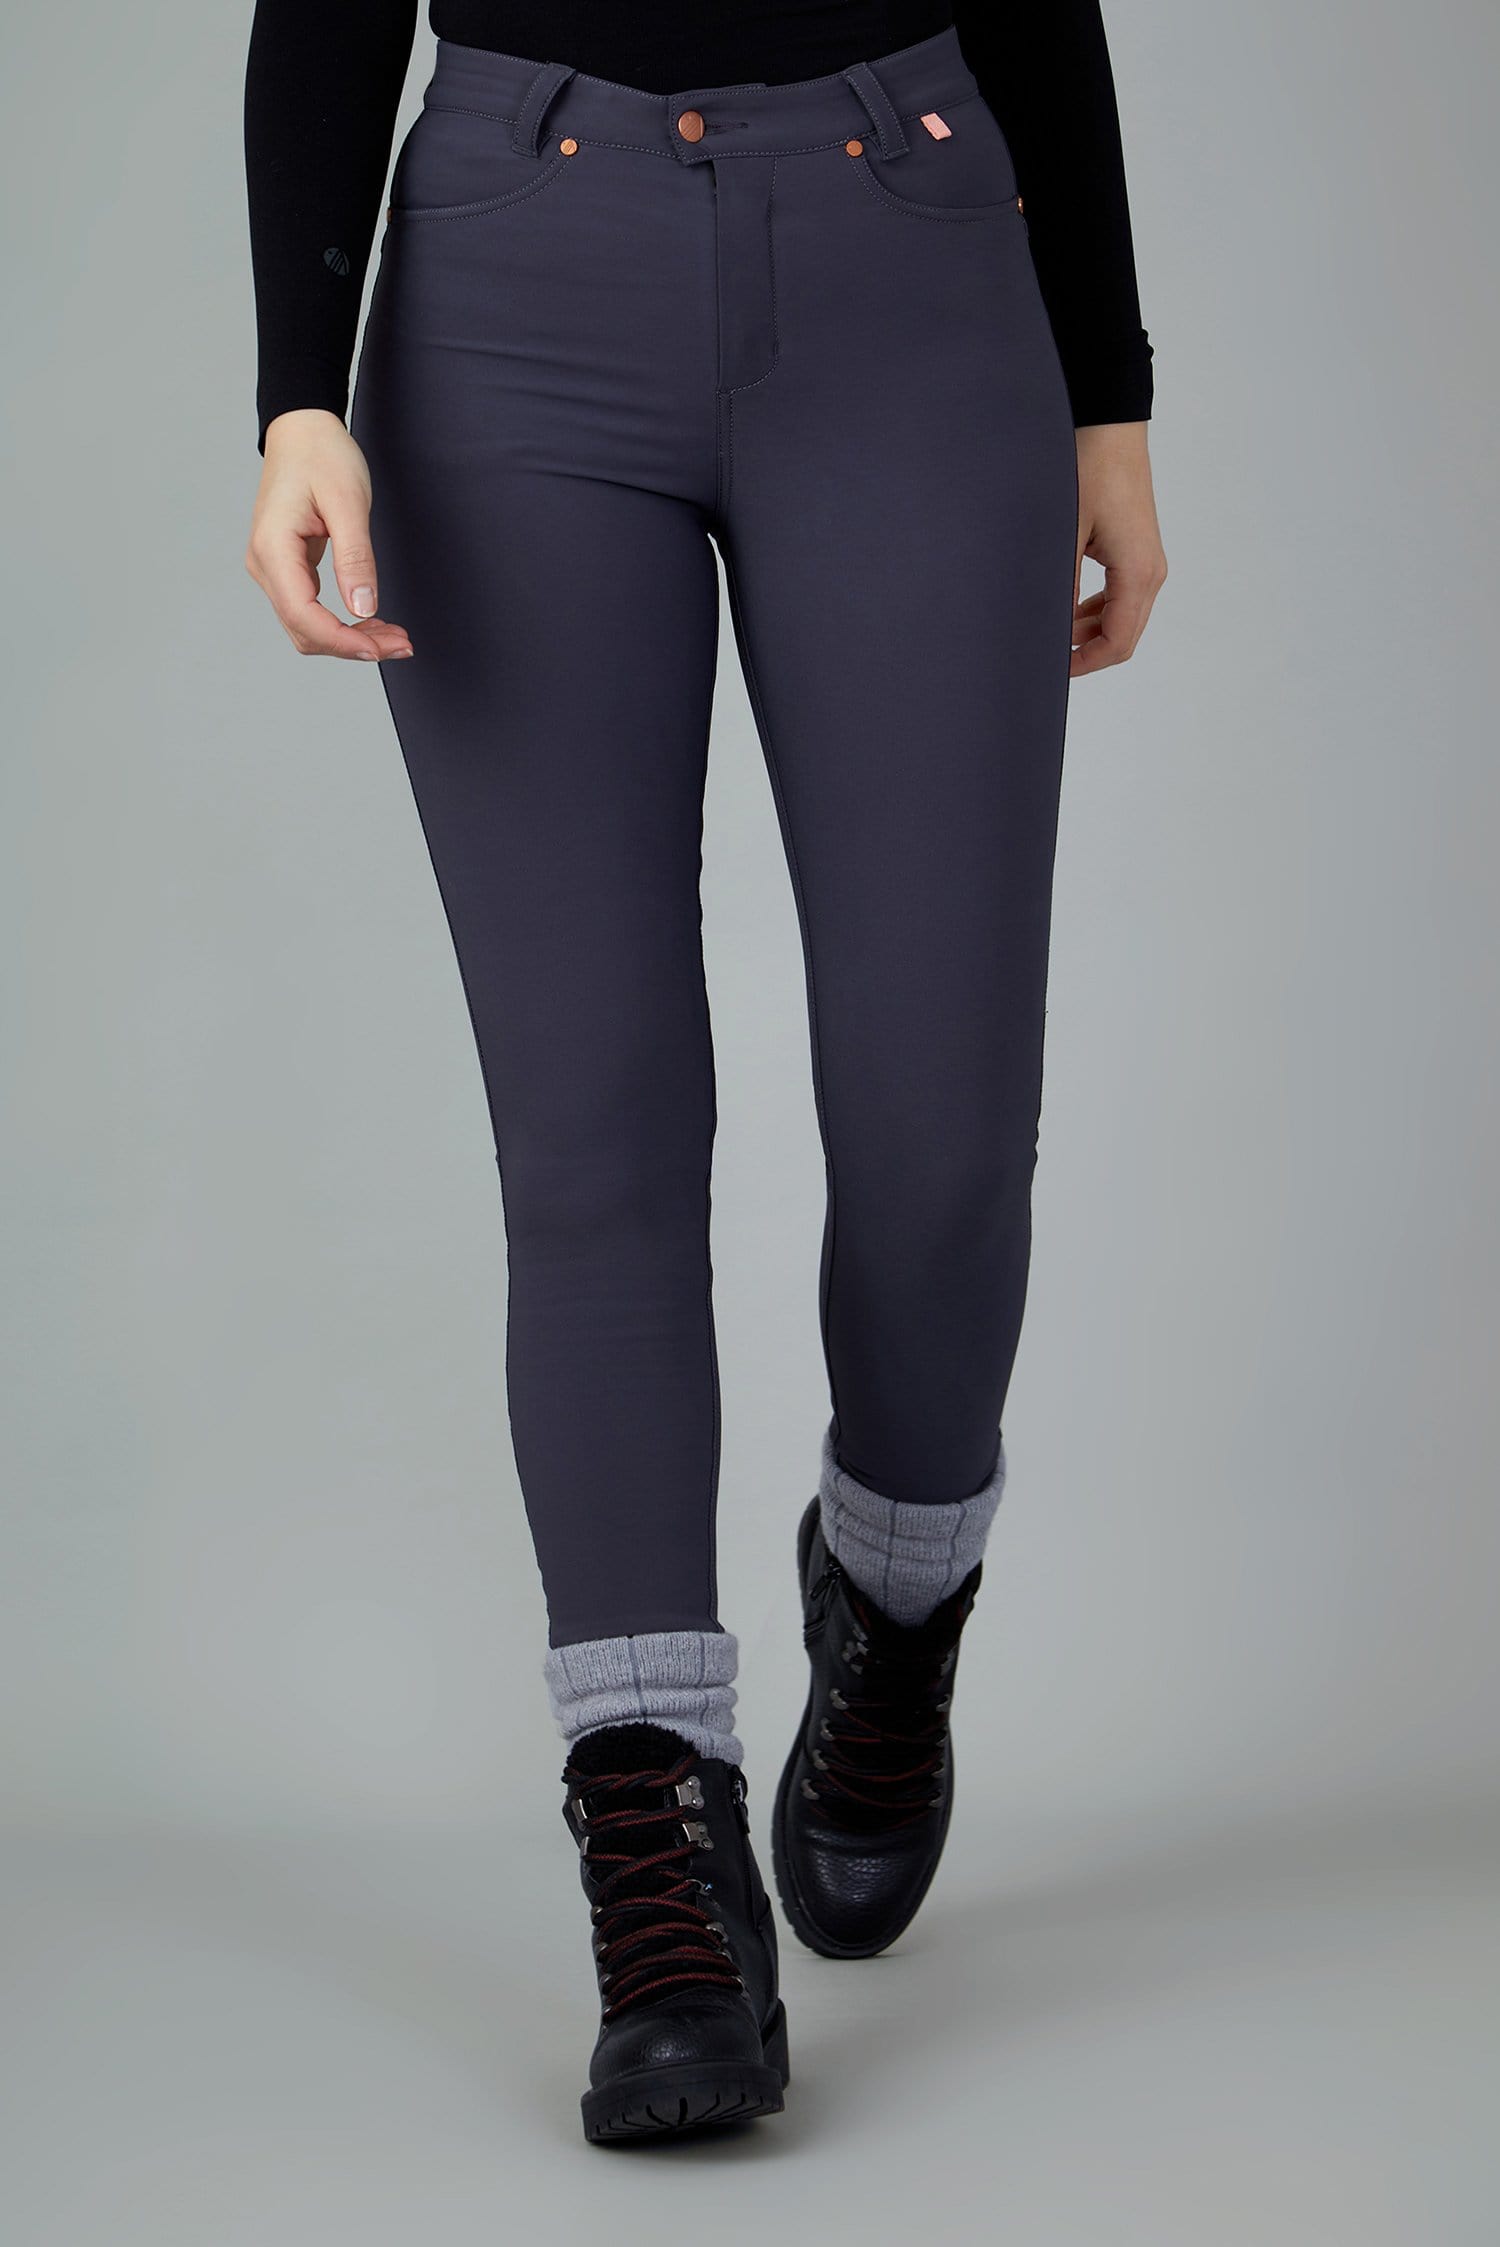 The Aventurite Stretch Skinny Outdoor Trousers - Obsidian - 36l / Uk18 - Womens - Acai Outdoorwear